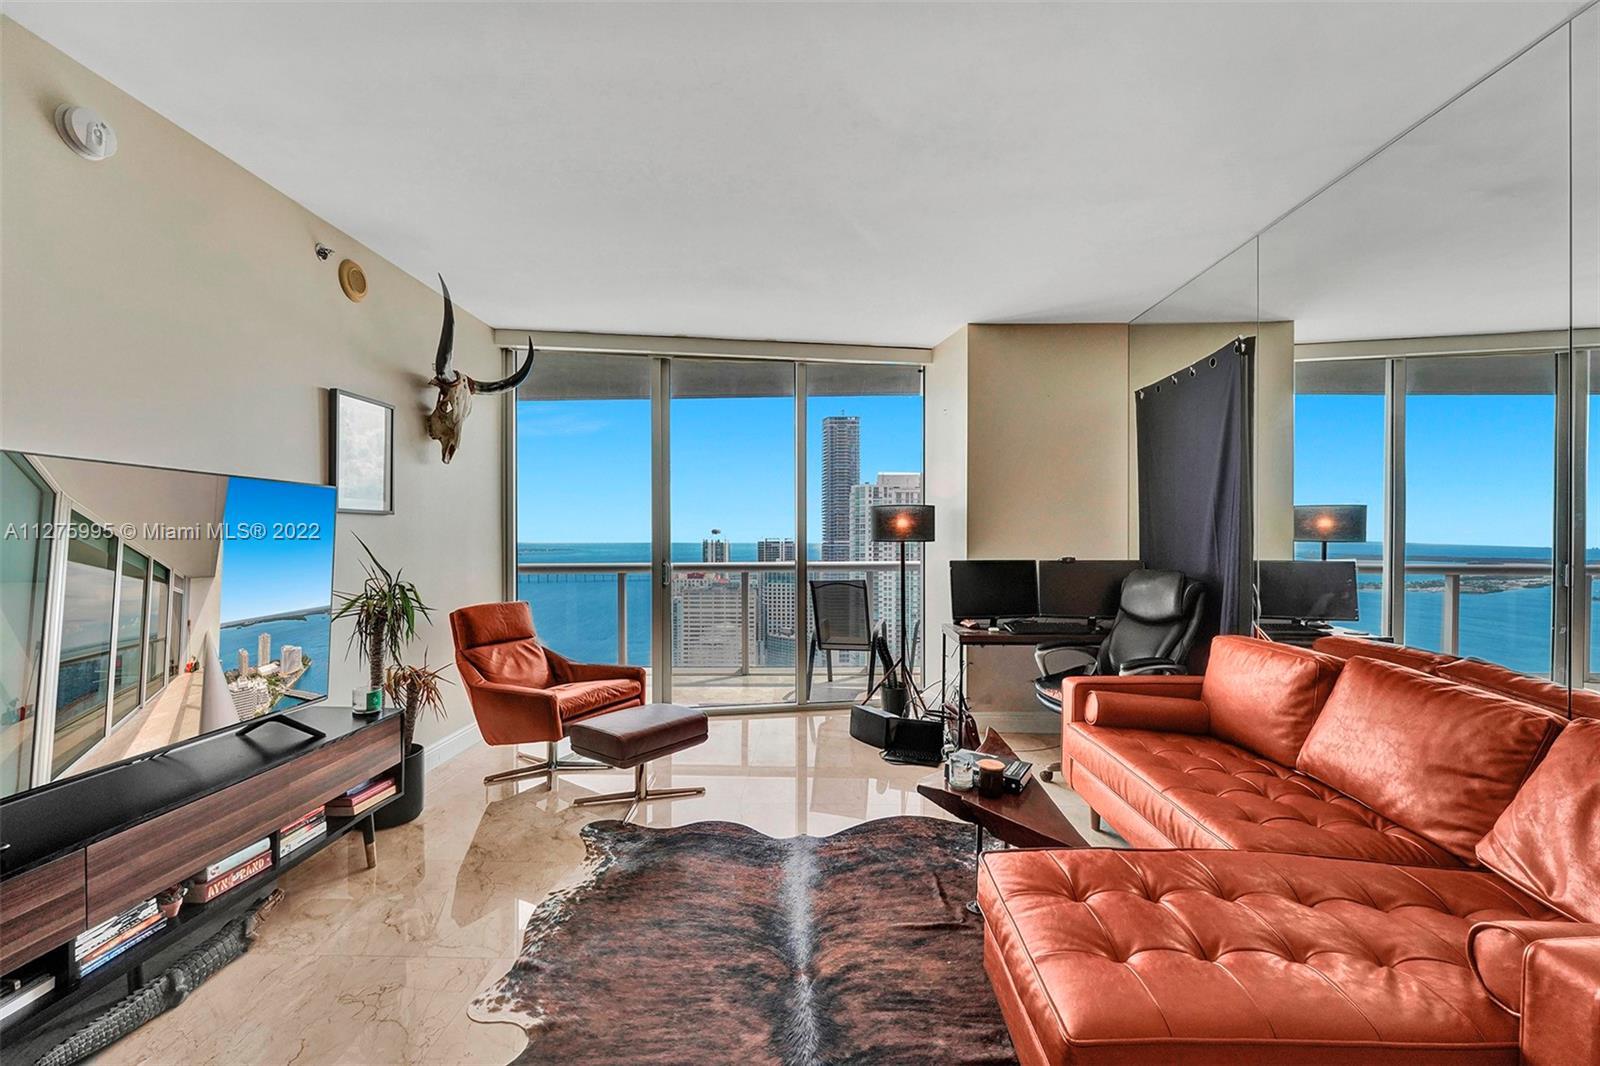 This gorgeous condo is the largest 1 bedroom floor plan Icon Brickell has to offer and has some of t